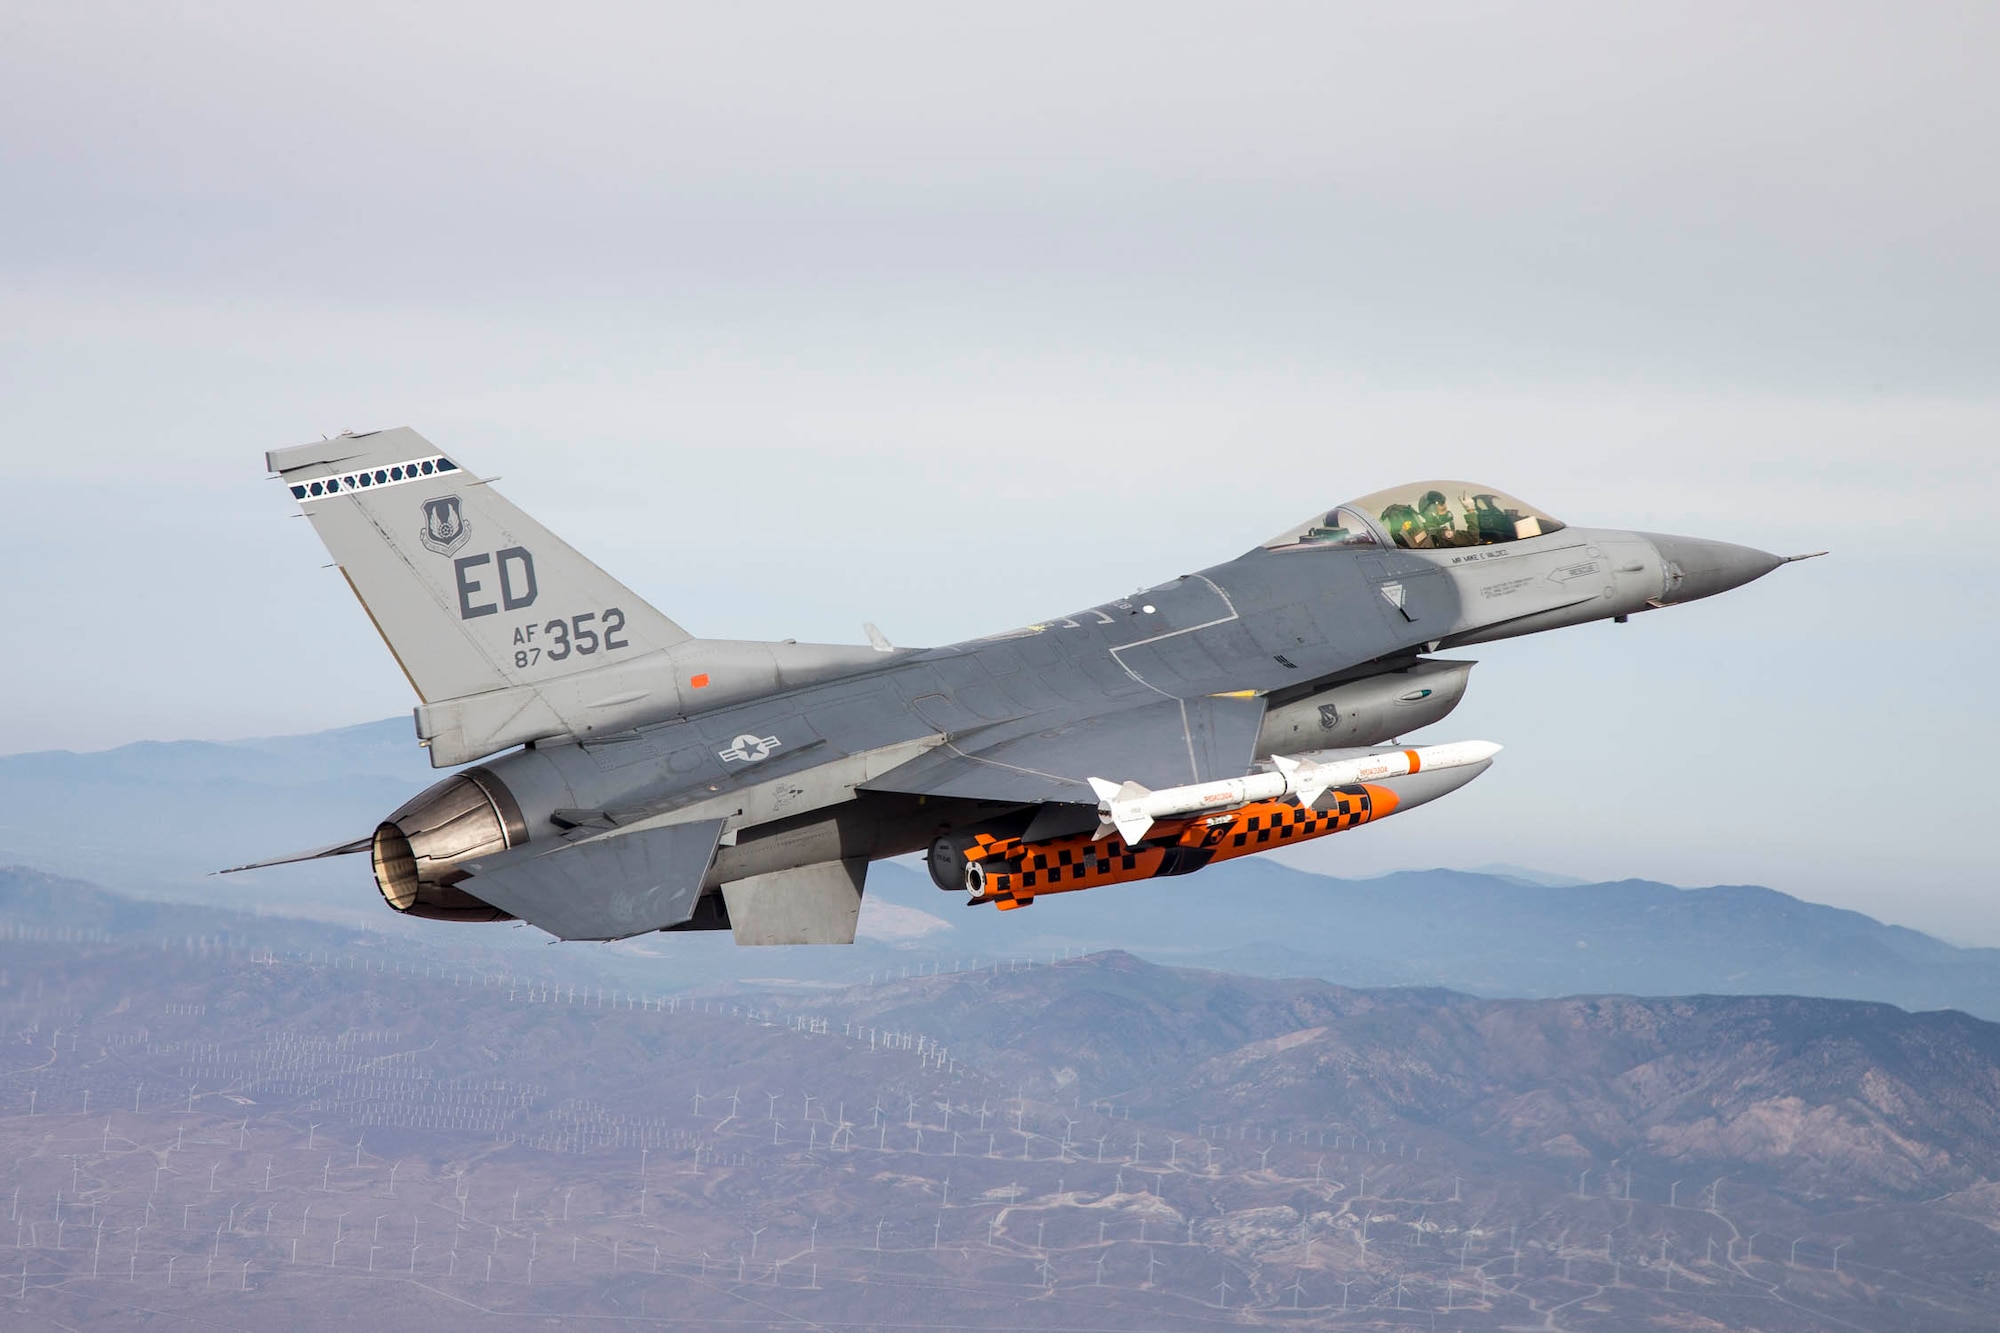 A U.S. Air Force F-16 Fighting Falcon piloted by Maj. Jameel Janjua of the Royal Canadian Air Force carries a developmental test version of the Joint Strike Missile to its release point above the Utah Test and Training Range west of Salt Lake City, Utah. When development is complete, the Joint Strike Missile is intended for use aboard the F-35 Lighting II Joint Strike Fighter. Janjua is assigned to the 416th Flight Test Squadron based at Edwards as part of an officer exchange program. (U.S. Air Force photo by Christopher Okula)